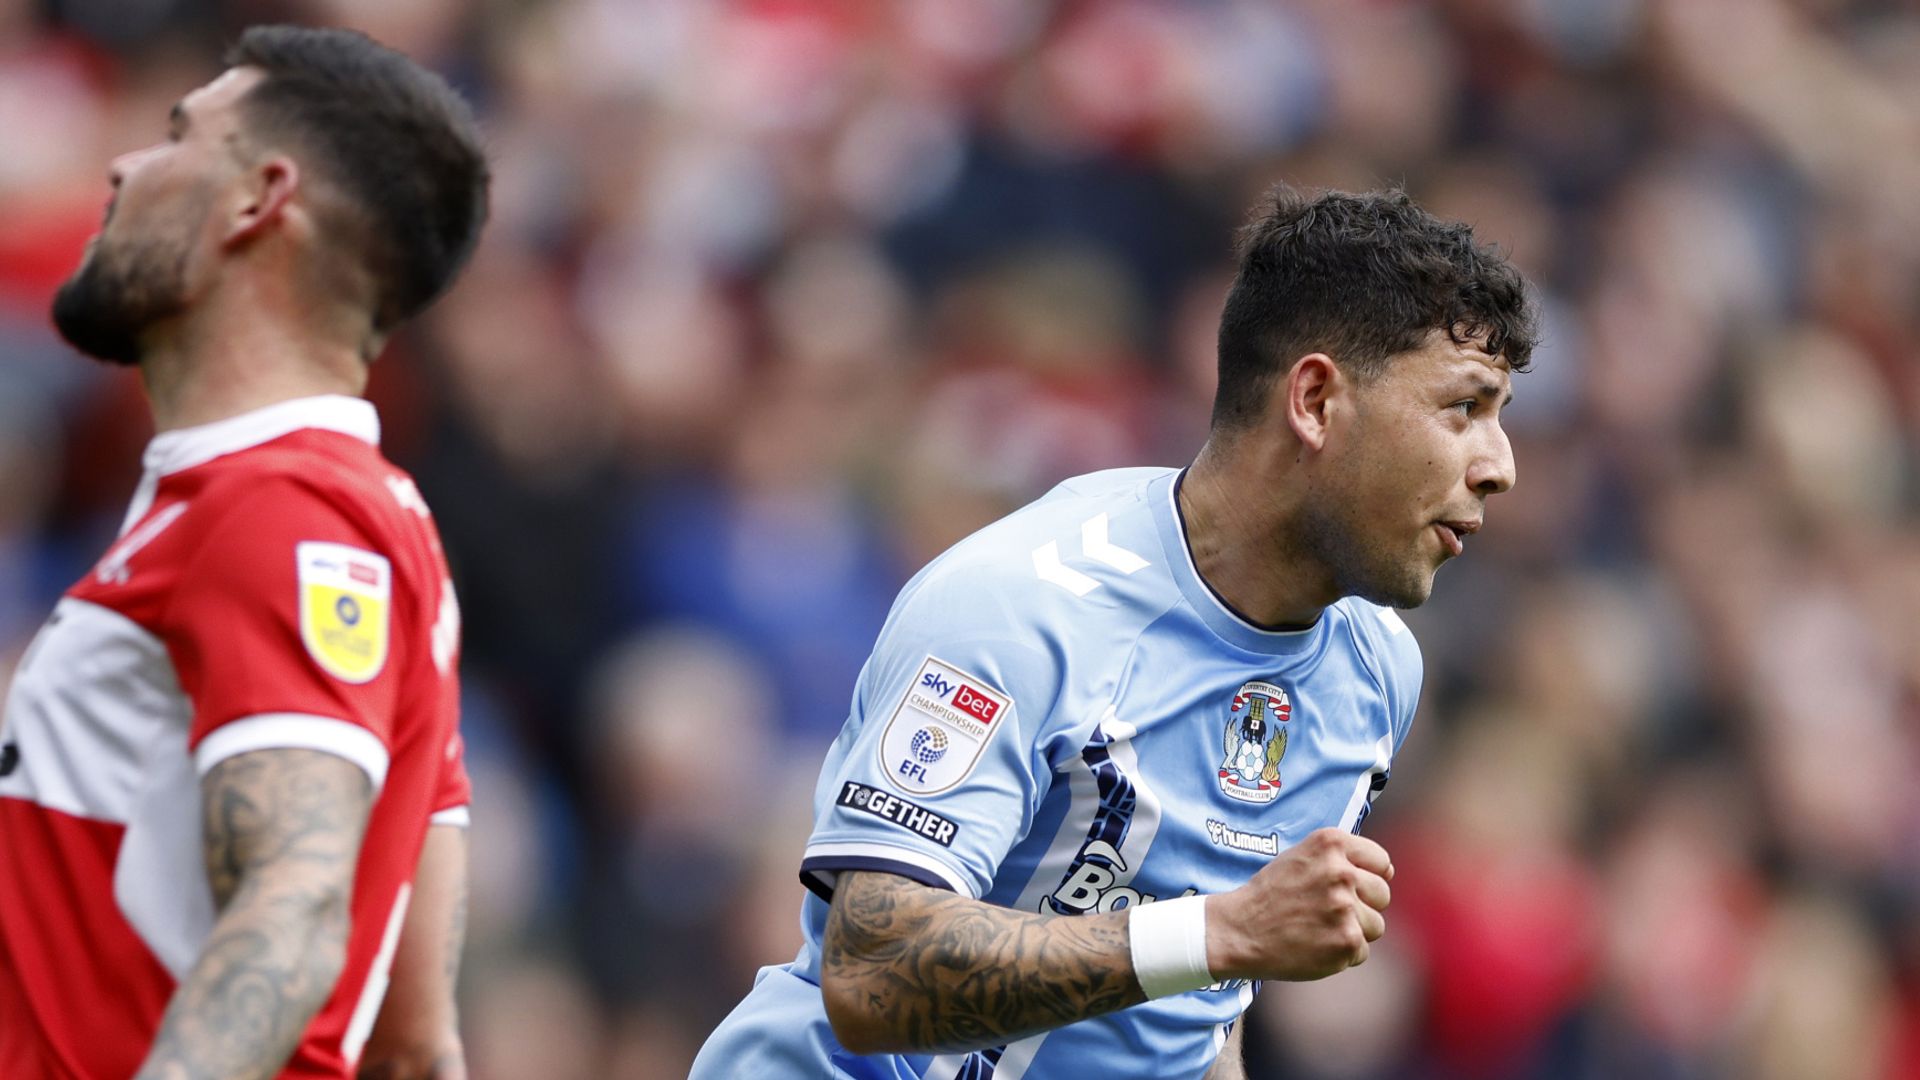 Championship final day: Sunderland set for play-offs, Millwall 4-3 down LIVE!